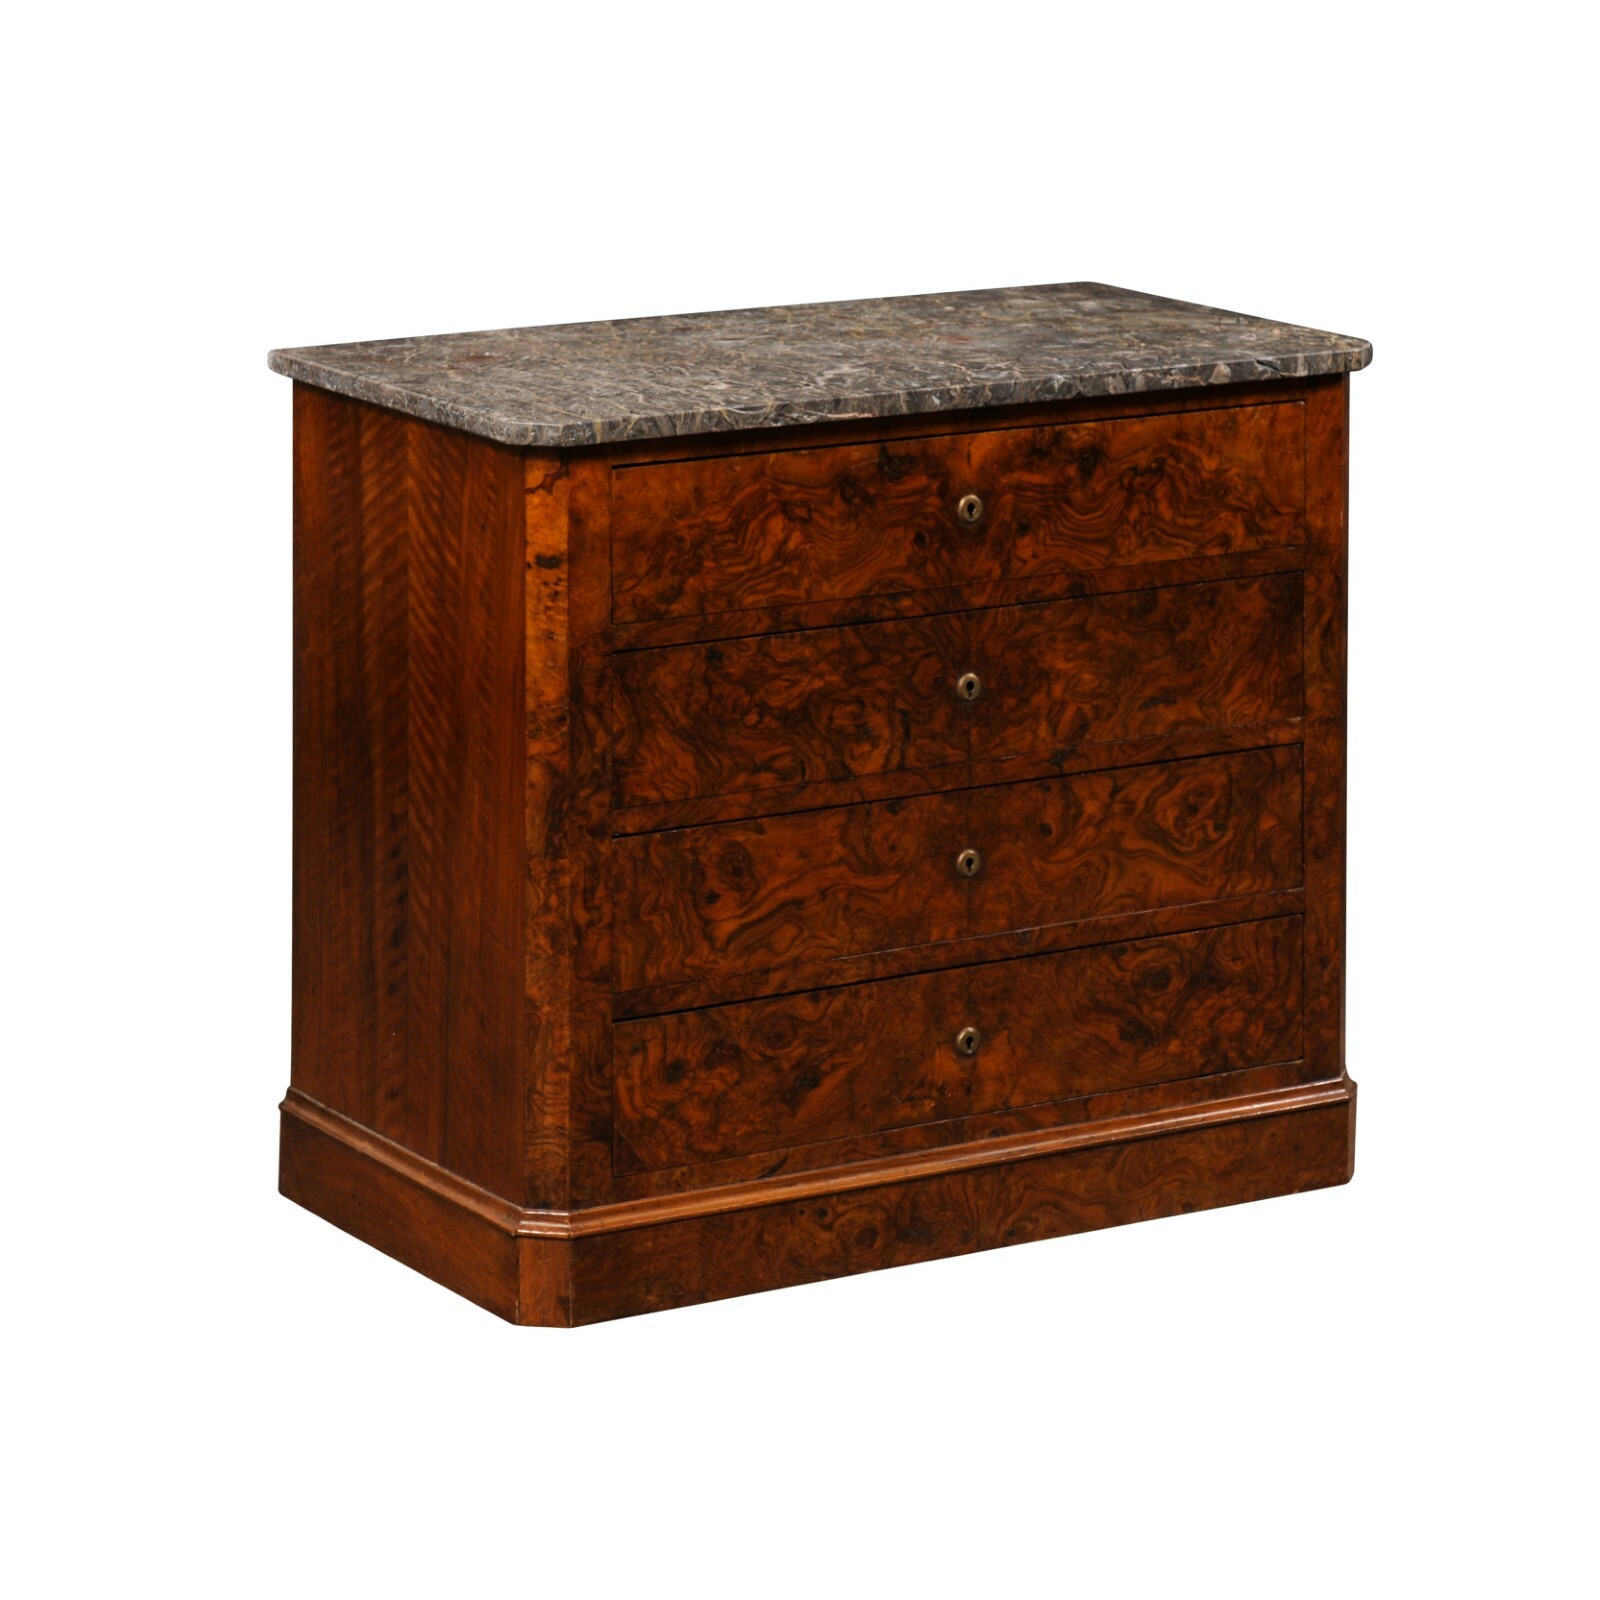 1820's French Burl-Wood Marble Top Commode